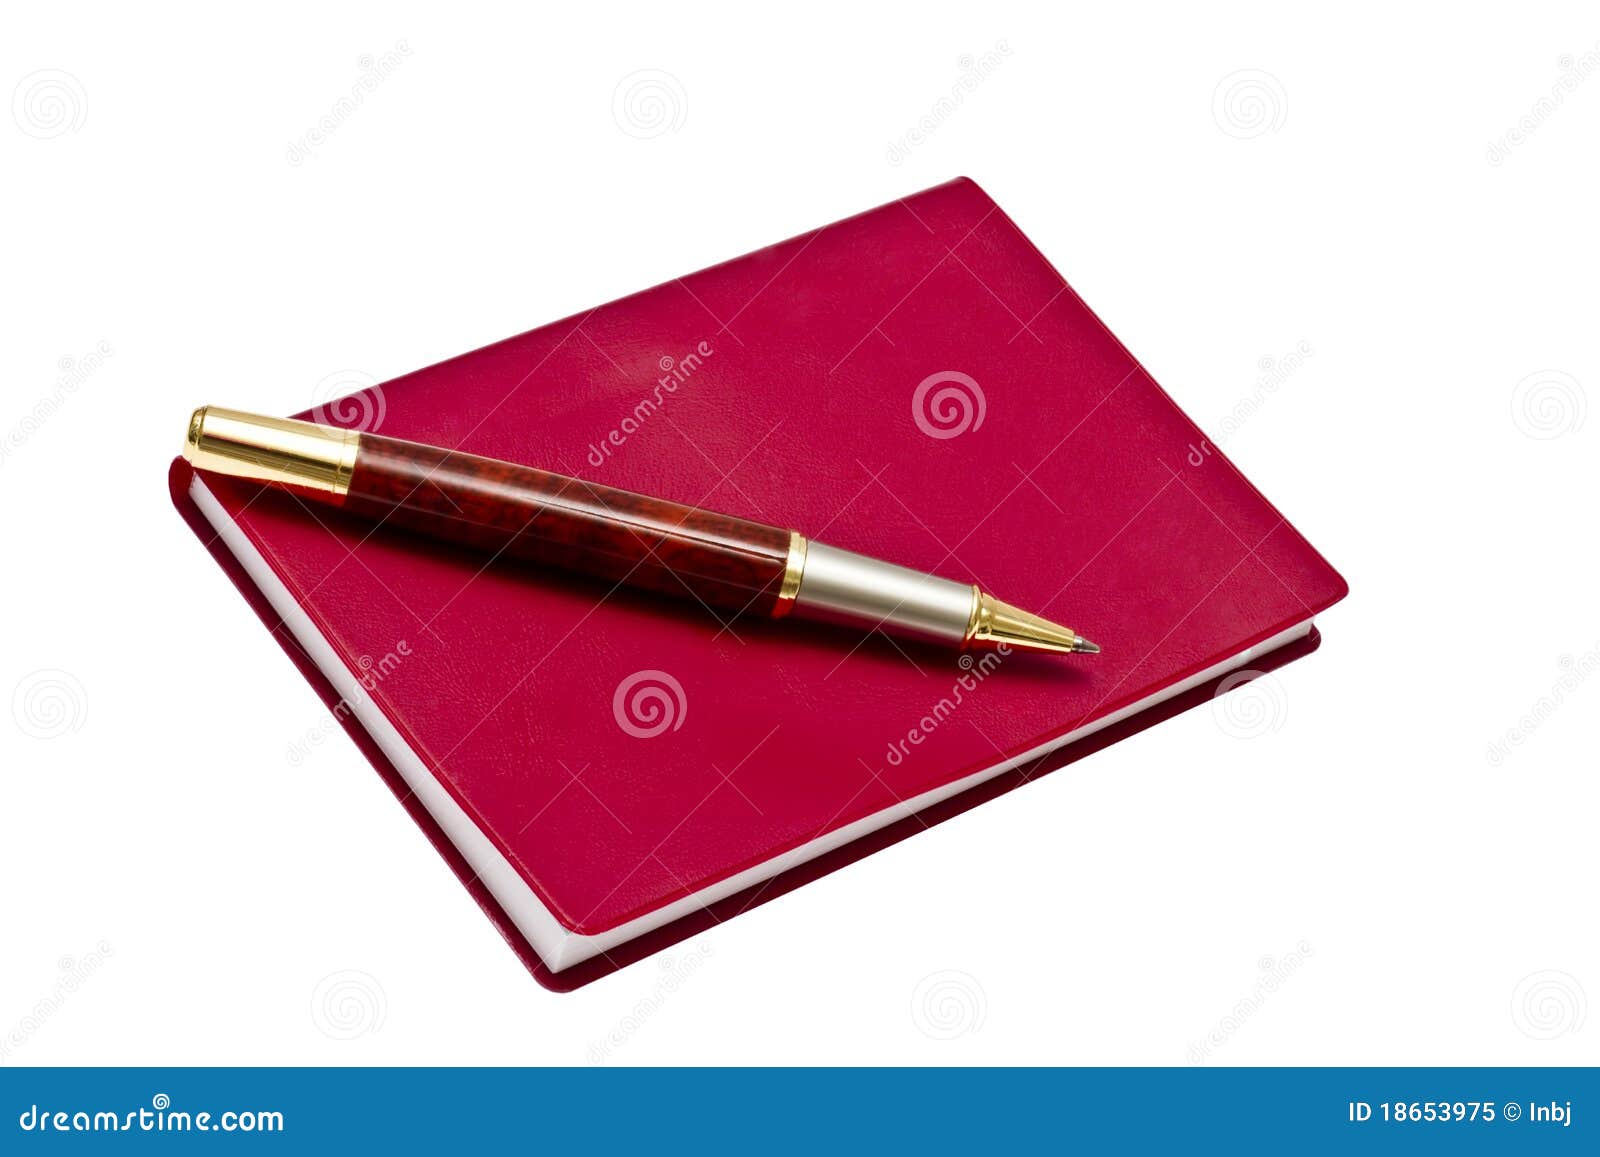 clipart book and pen - photo #29